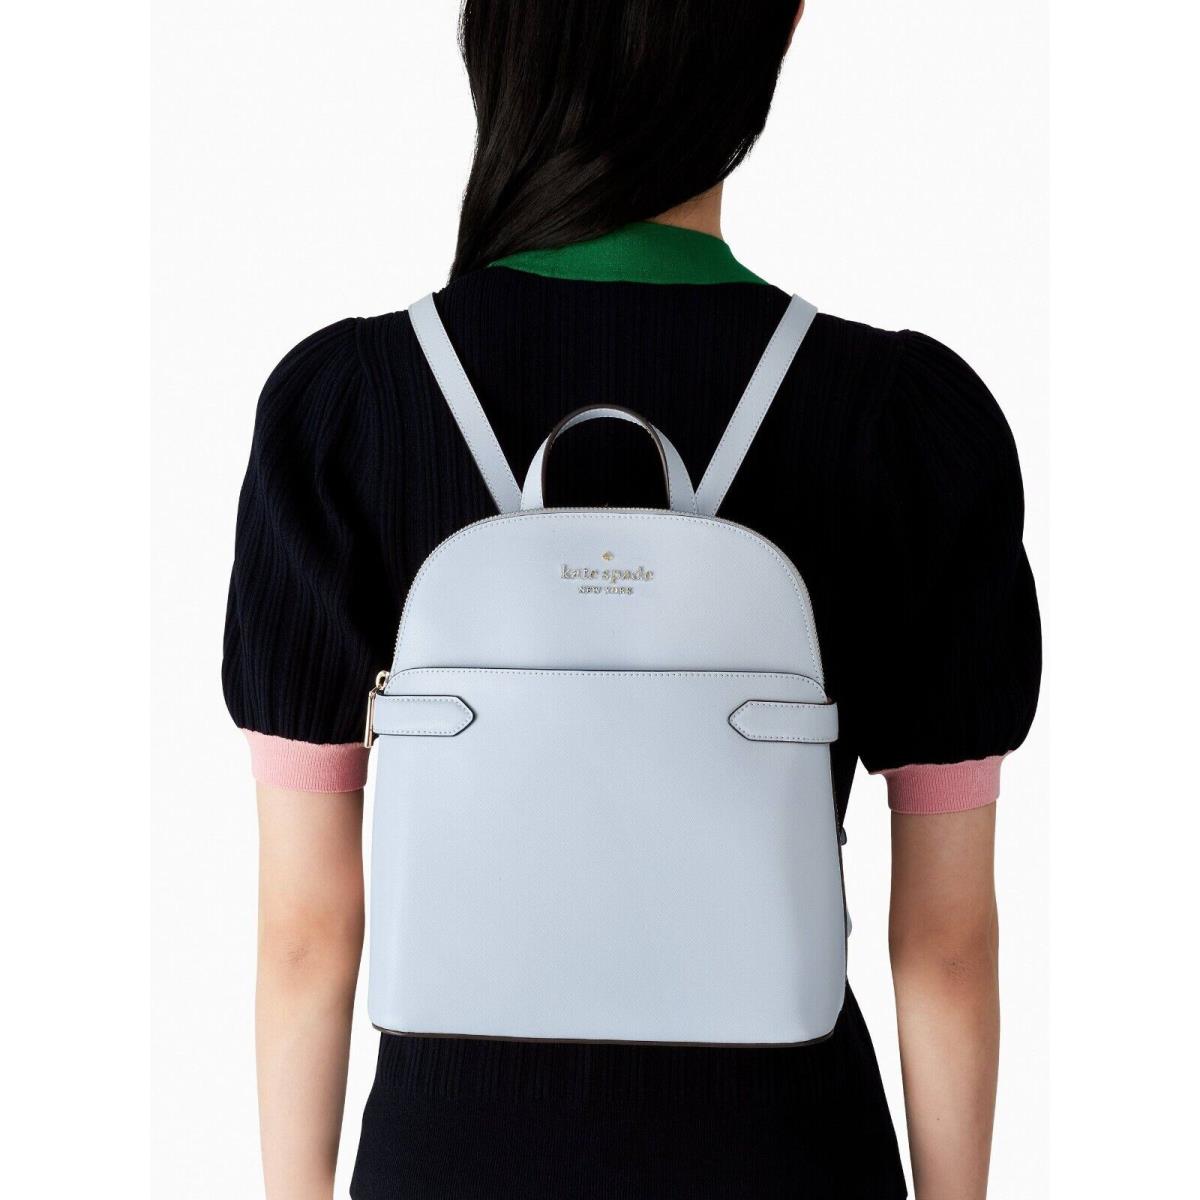 New Kate Spade Staci Saffiano Leather Dome Backpack Pale Hydrangea - Exterior: Pale Hydrangea